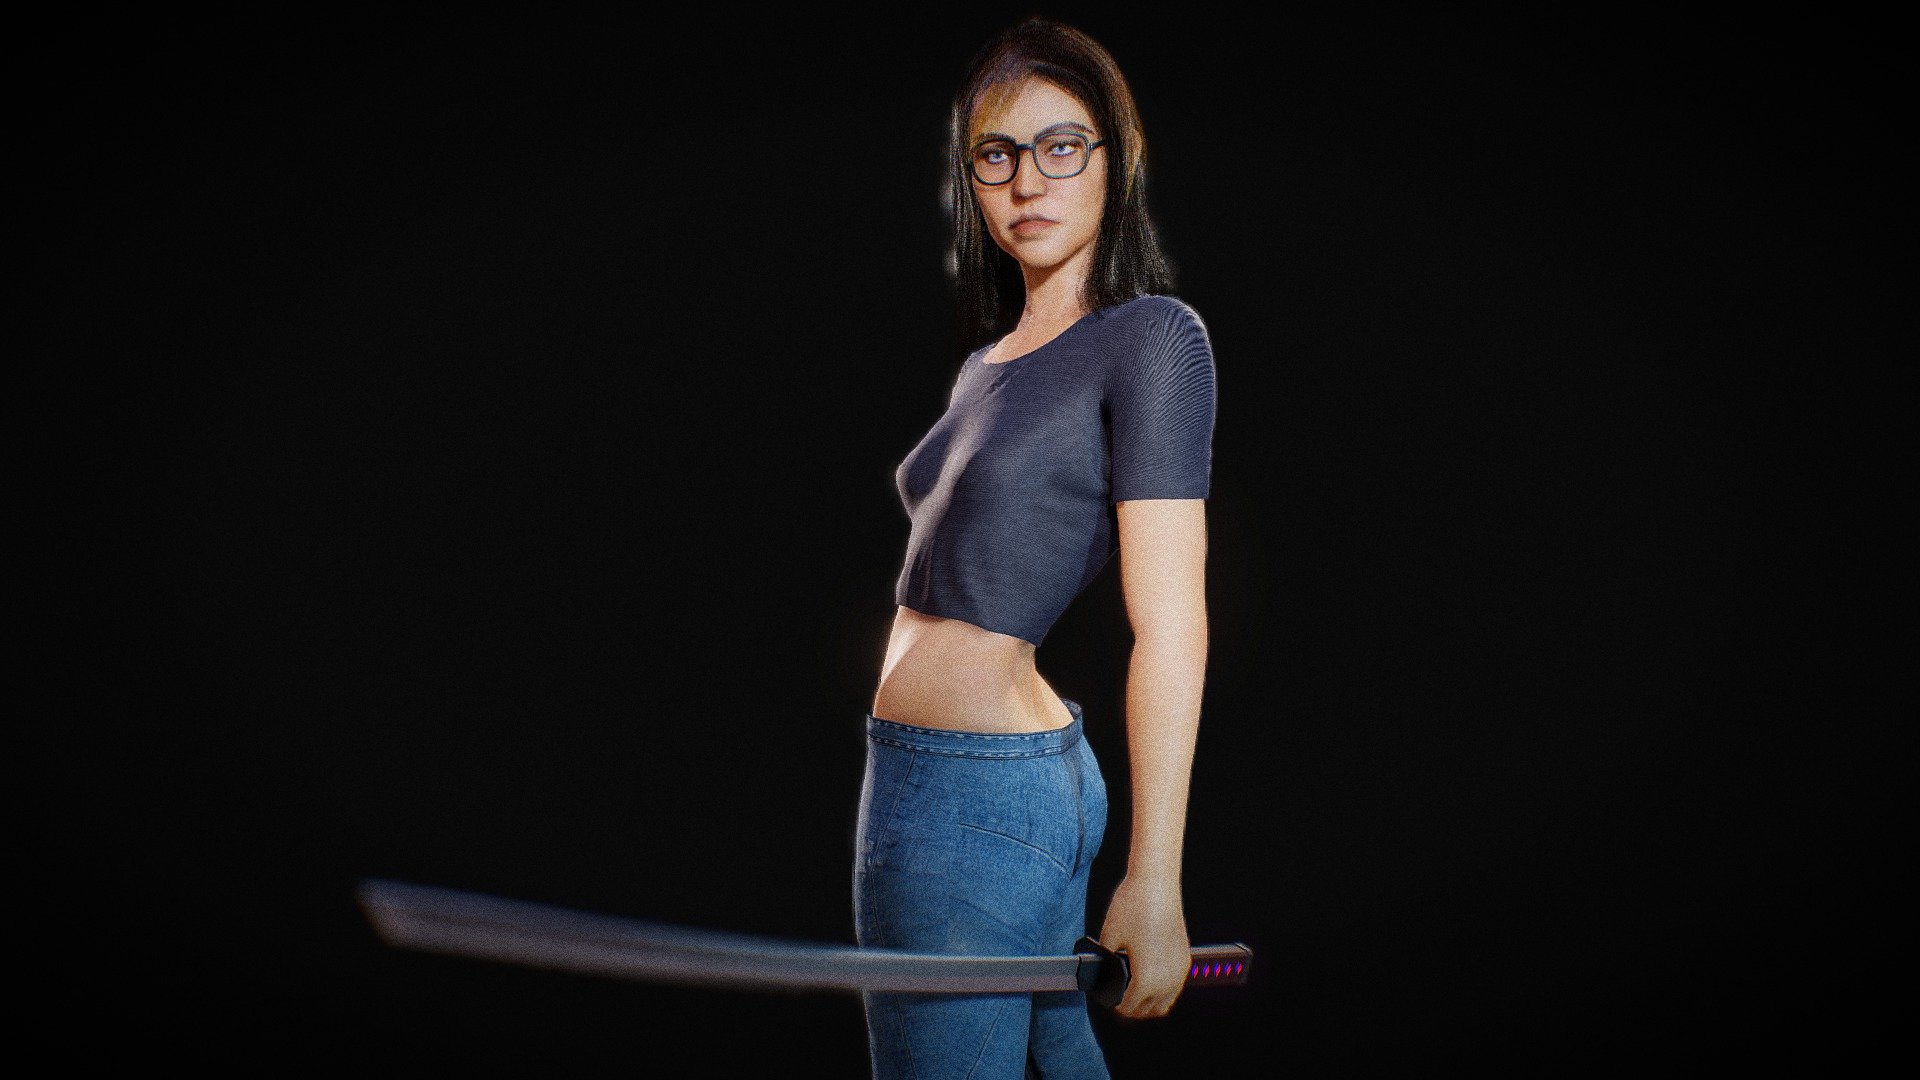 Download here:
https://skfb.ly/onopS

Cloth Test, casual. model in blender, cloth with blender physics. textures from TextureHeaven. Fully rigged. subsurface scattering 3d model